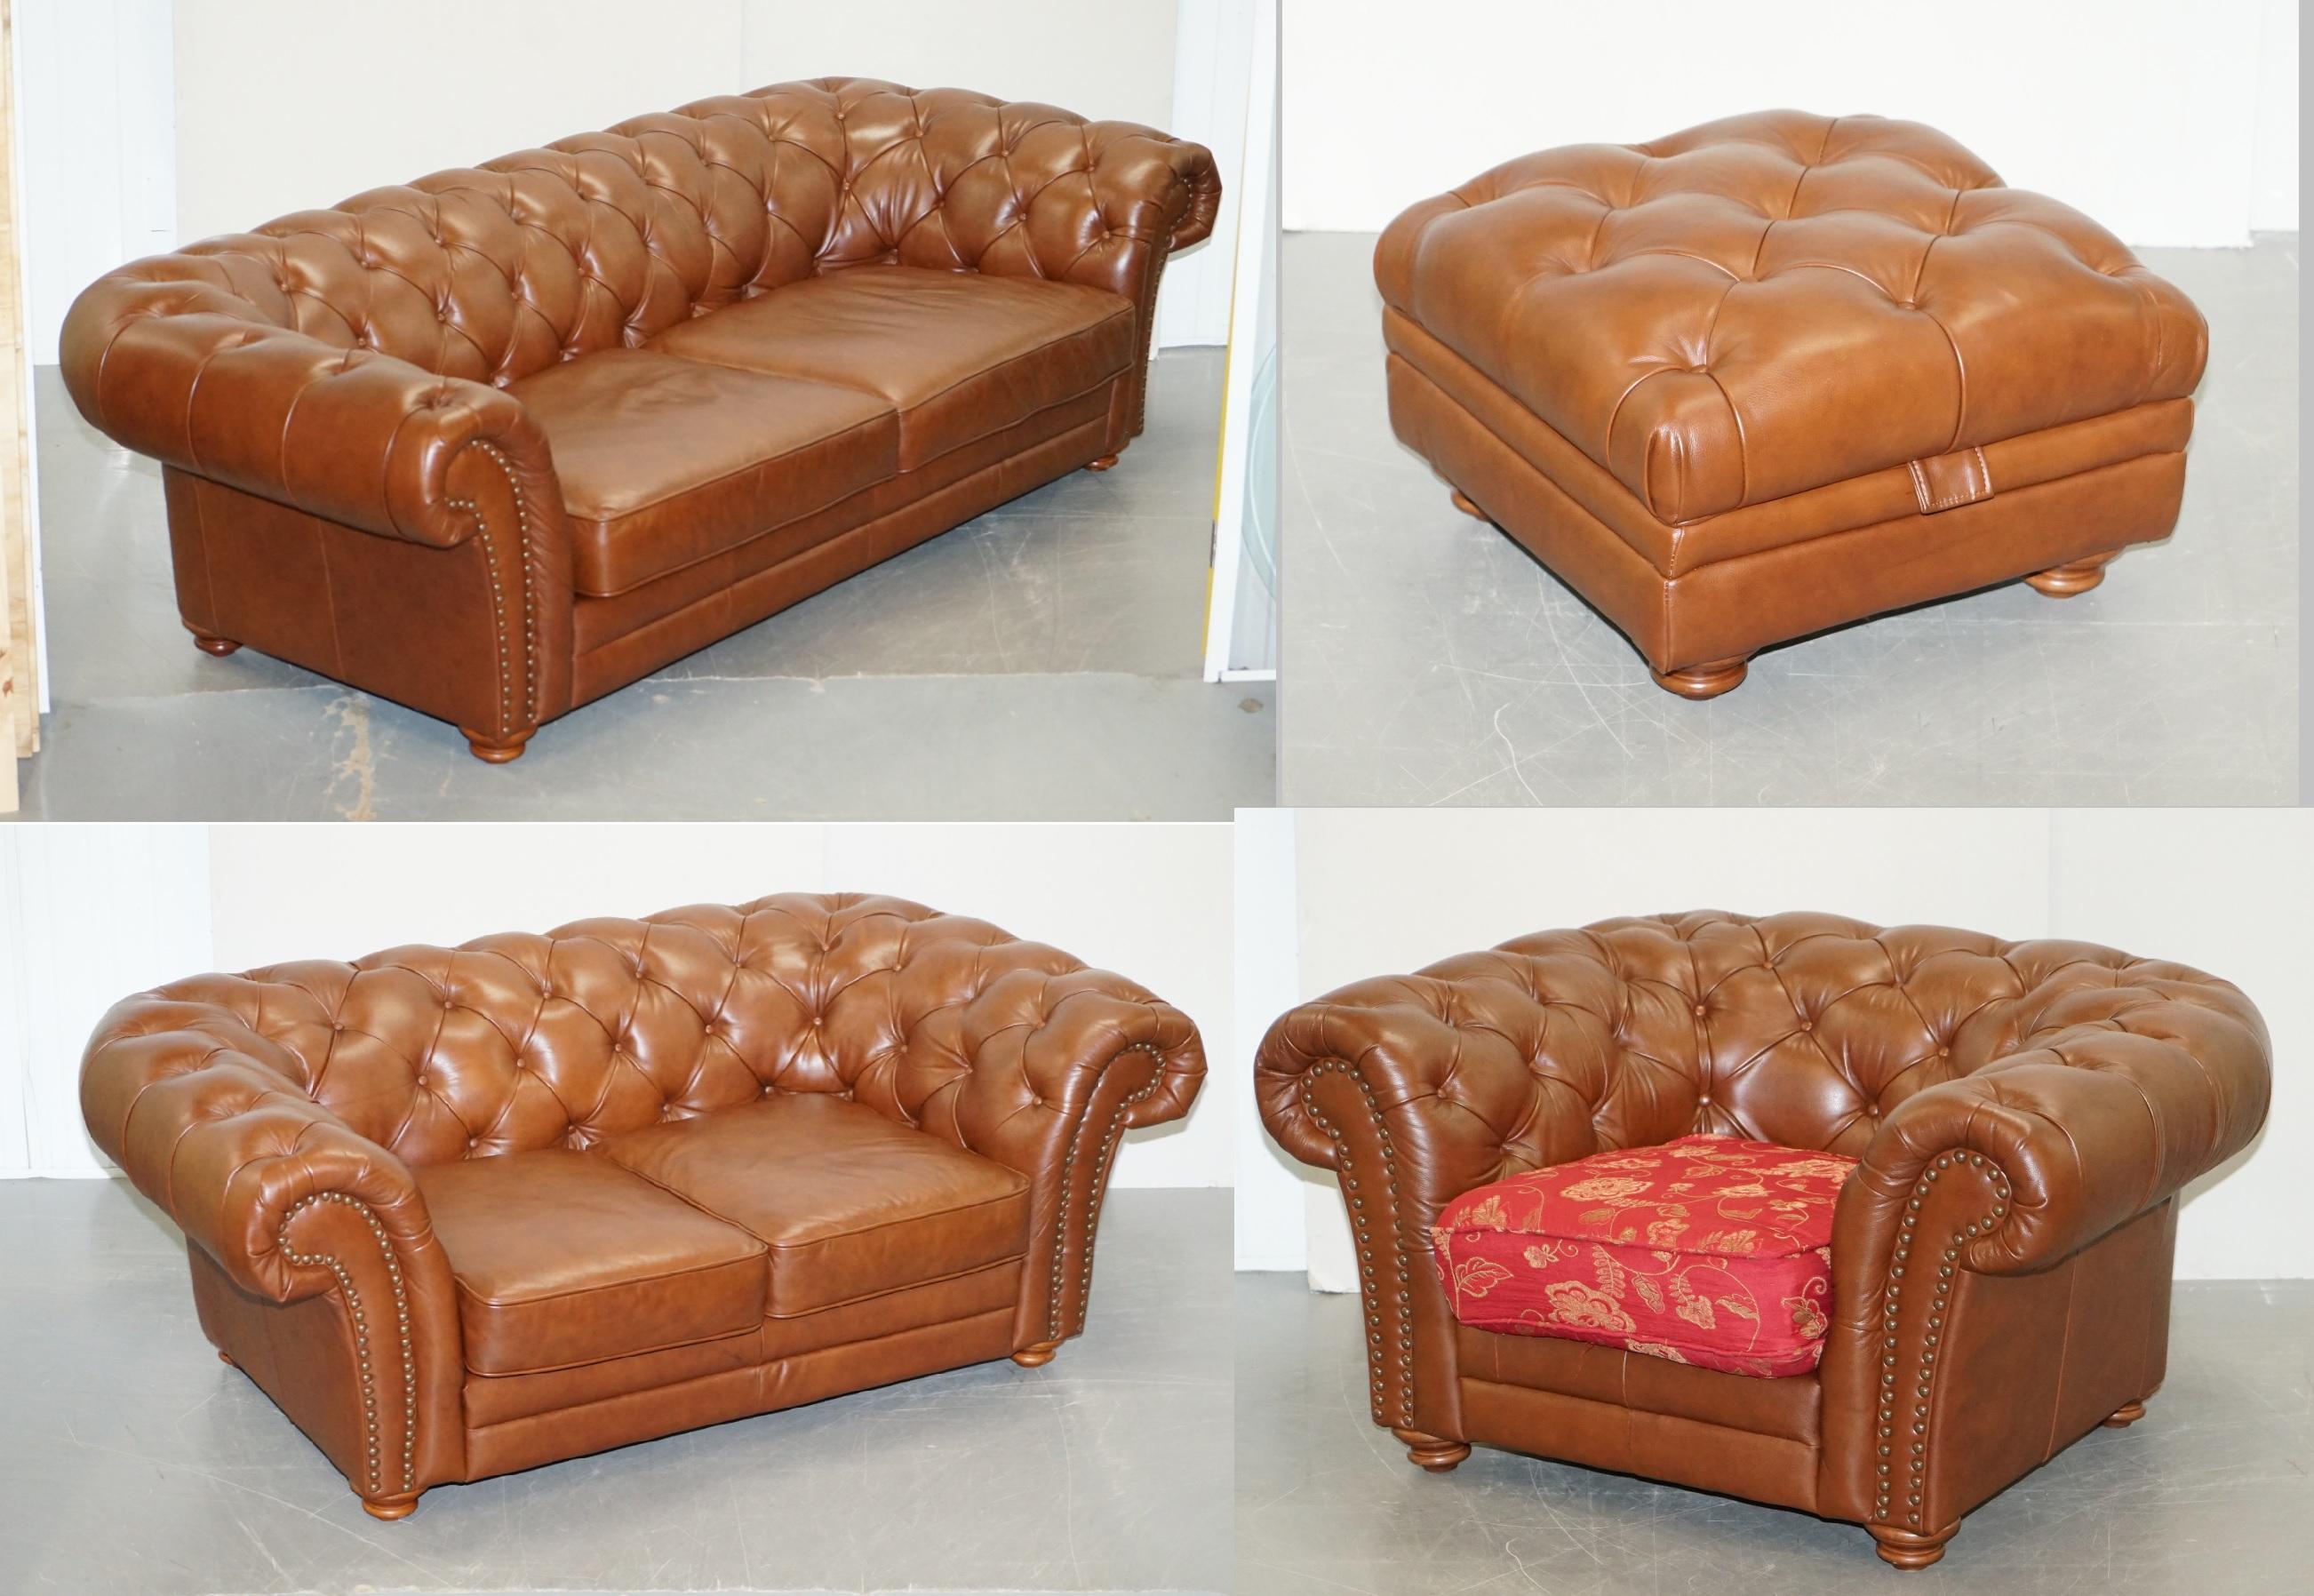 We are delighted to offer for sale this very nice Chesterfield brown leather armchair made by Tetrad England which is part of a large suite

The armchair has been deep cleaned hand condition waxed and hand polished, its in very fine order